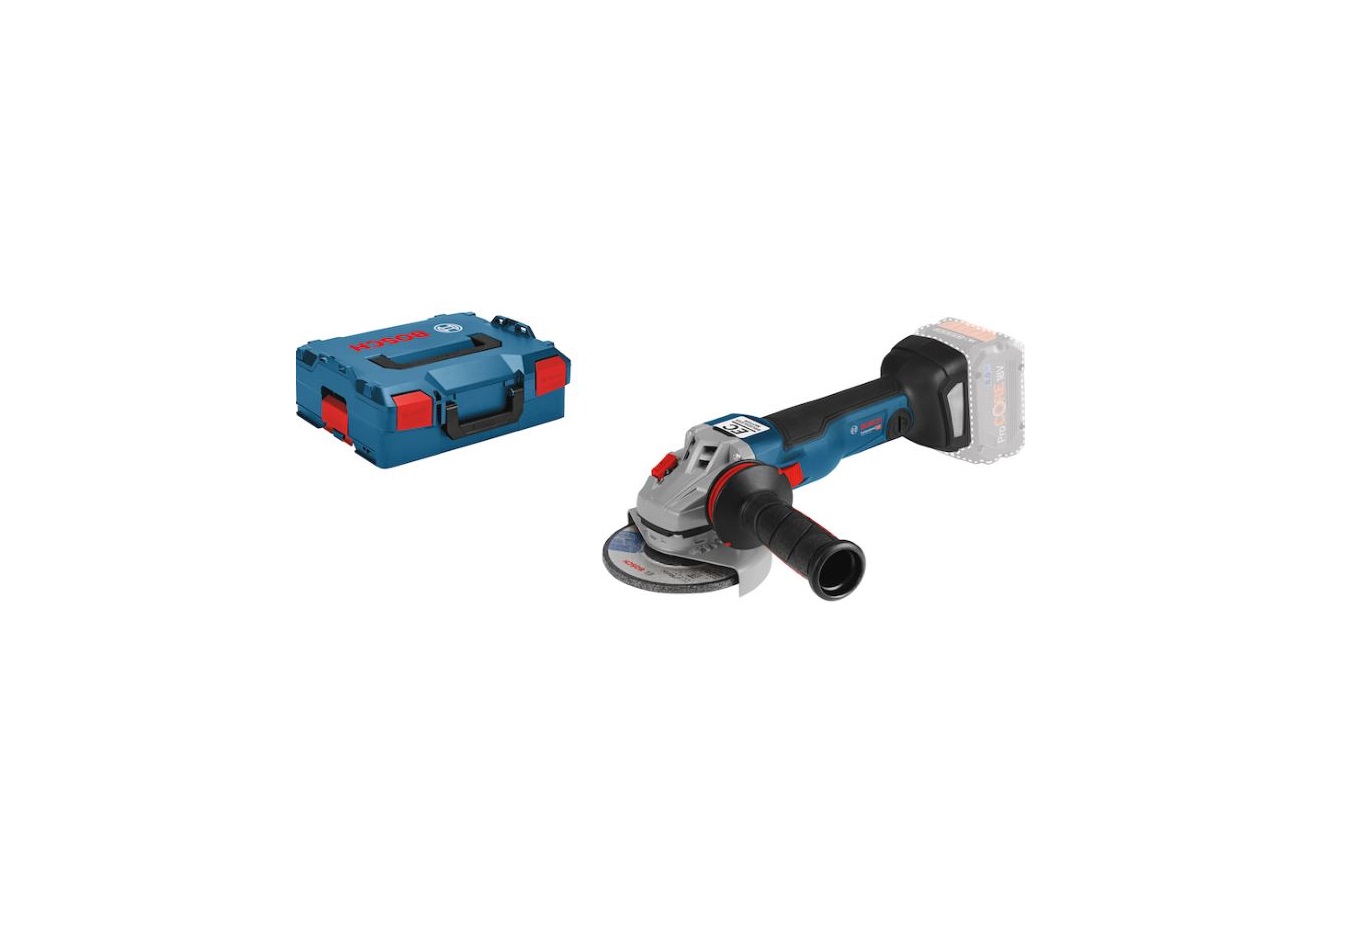 BOSCH GWS 18V-10 Professional Grinder Instructions - Featured image